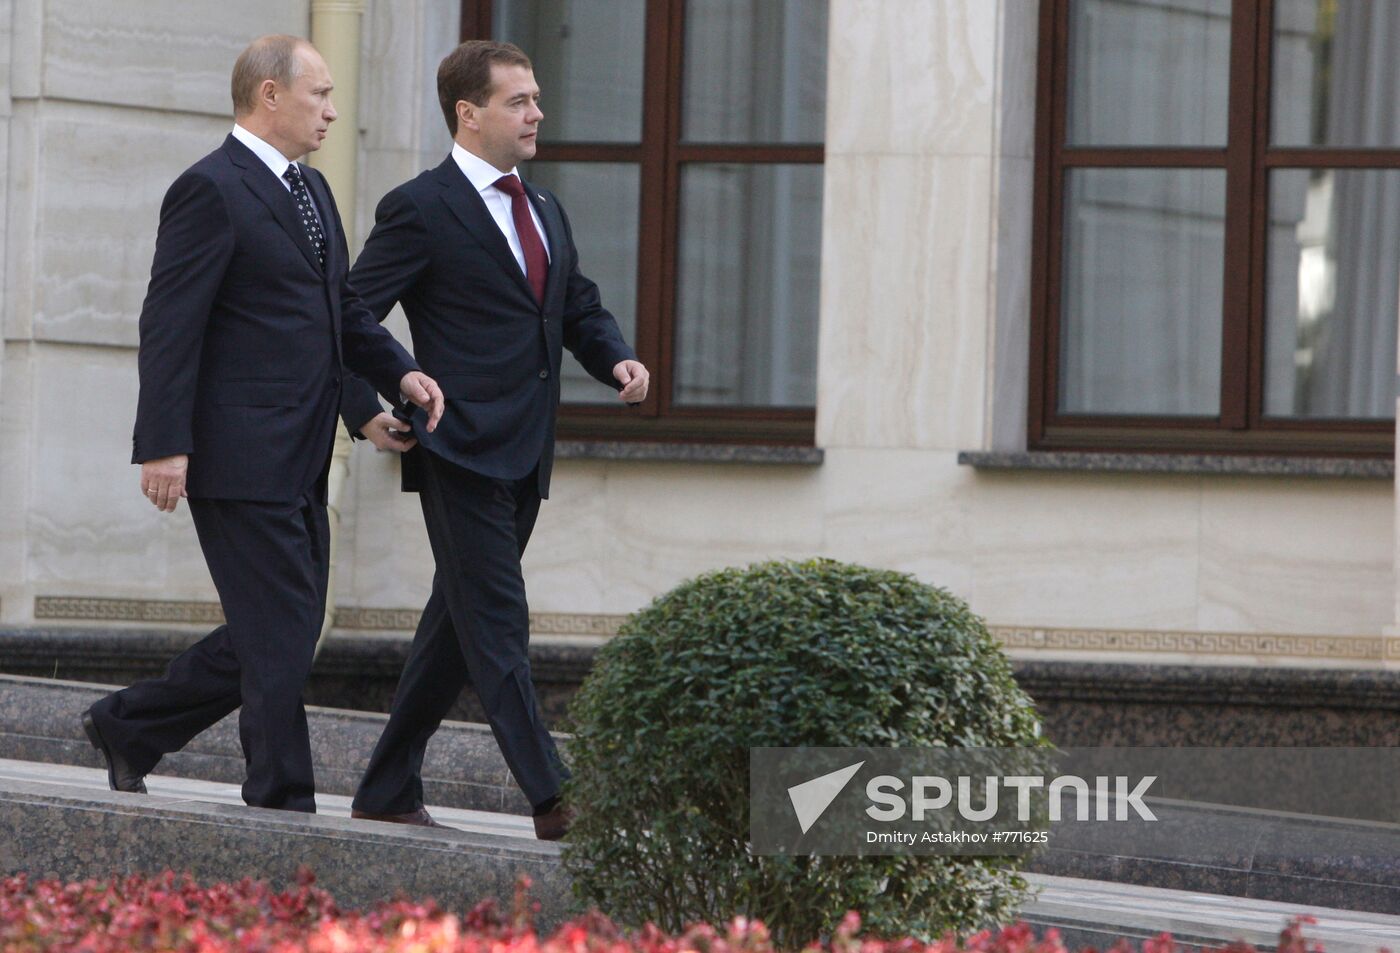 President Medvedev meets with Prime Minister Putin